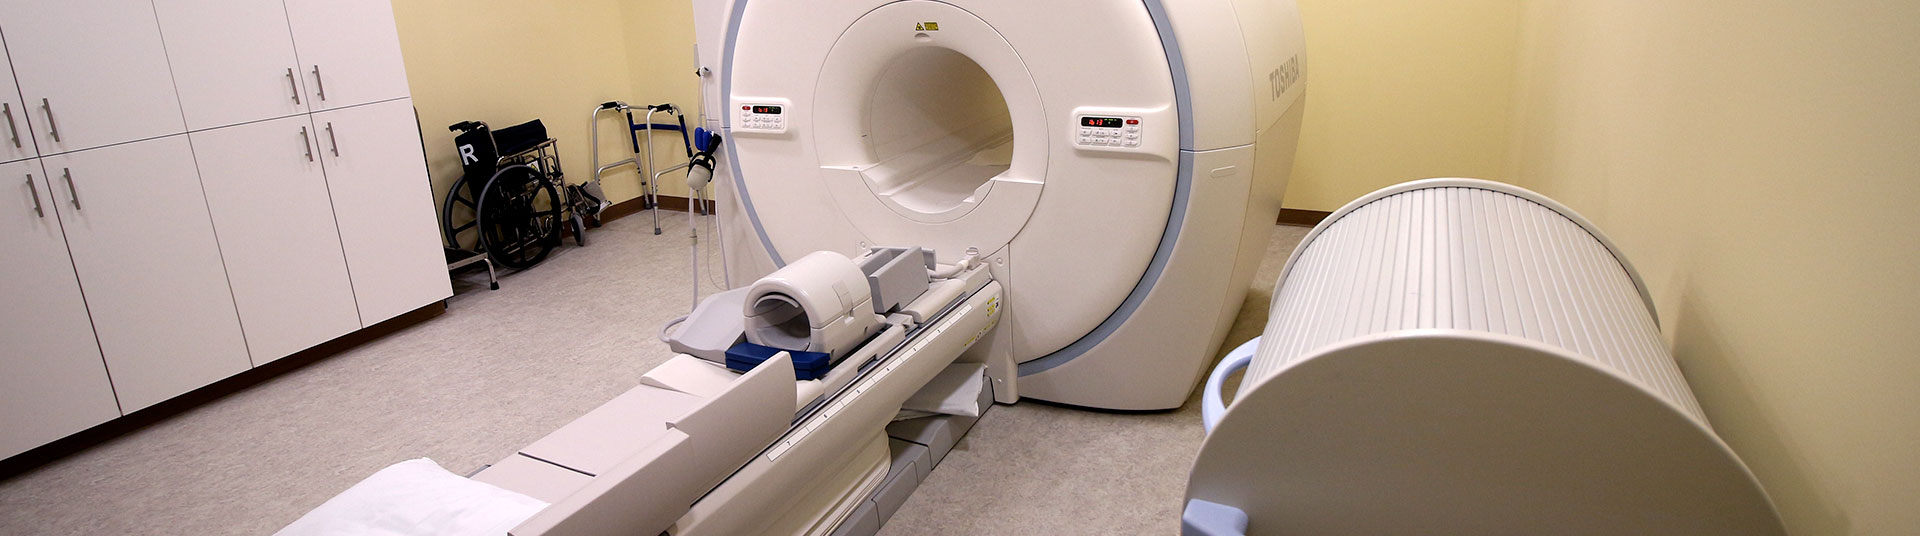 MRI and X-ray Imaging Services